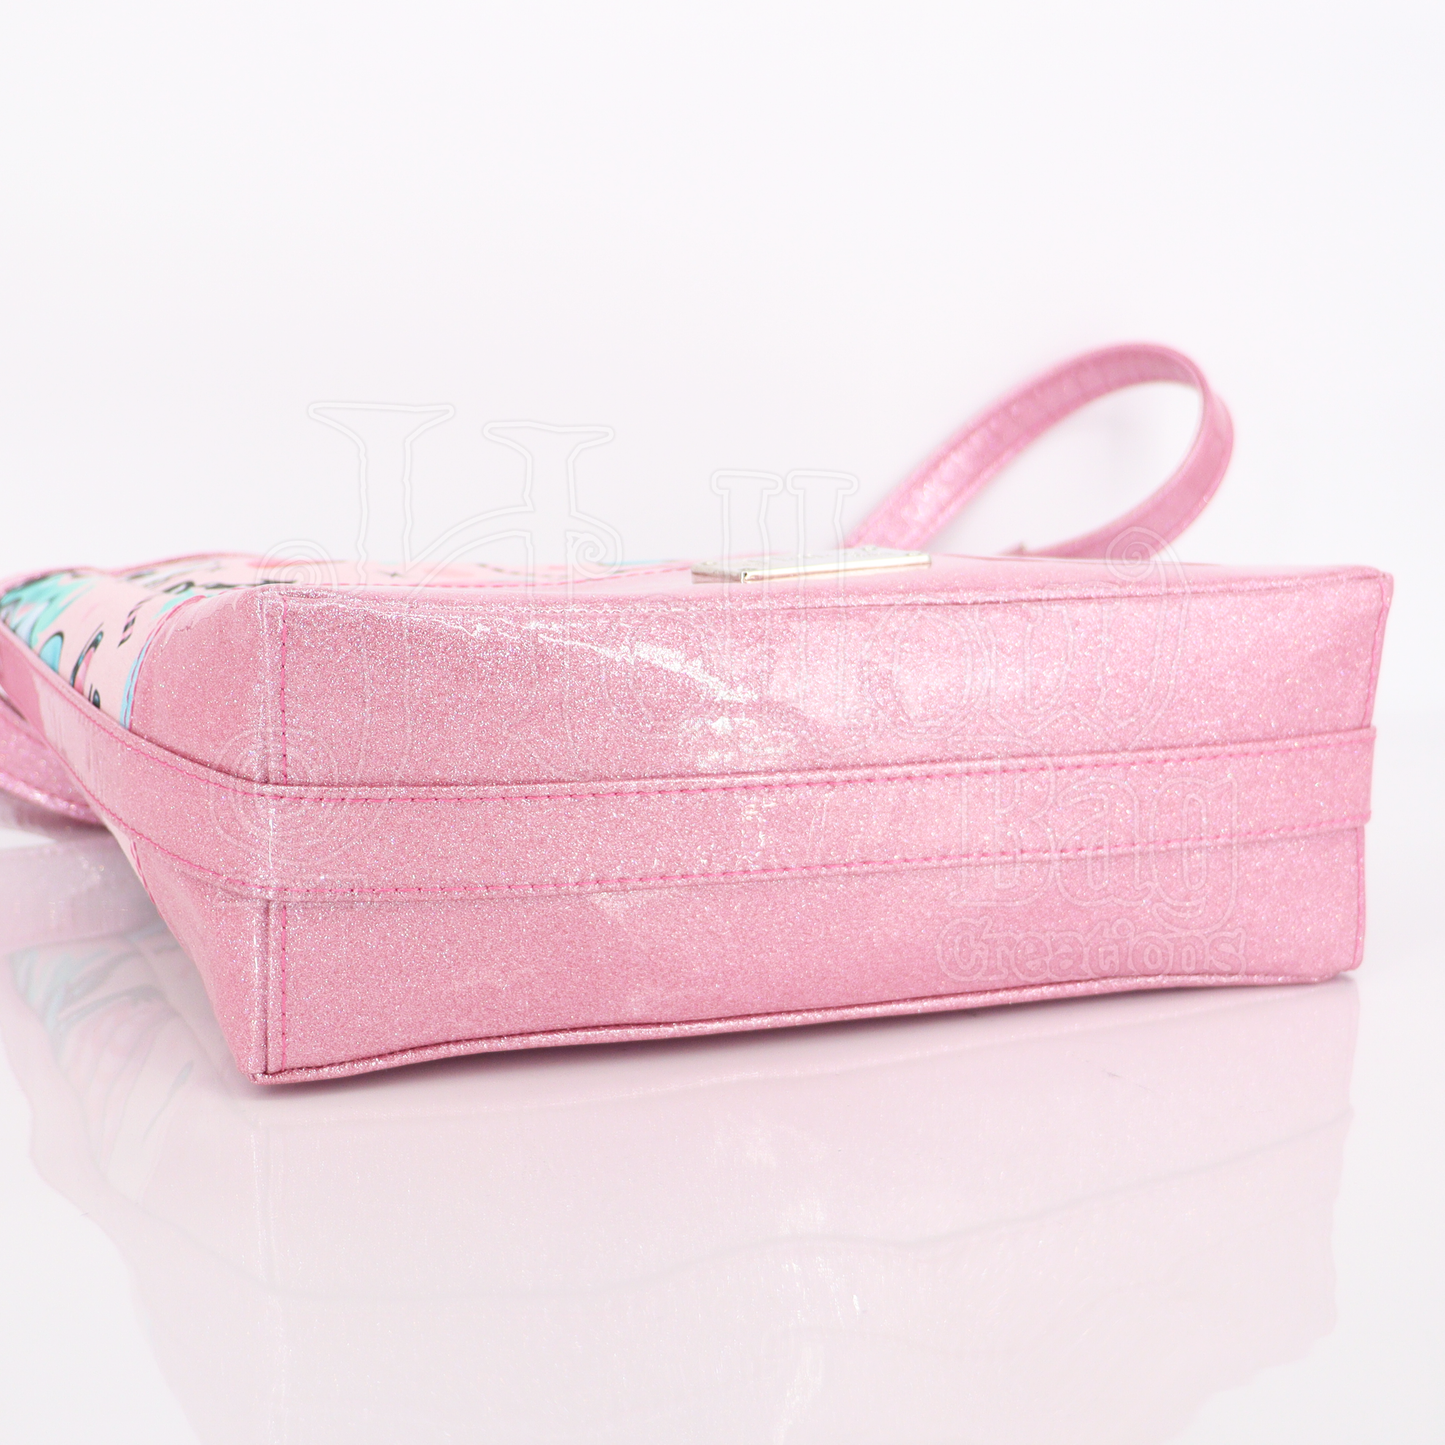 Sanctuary Tote - Pink Candy